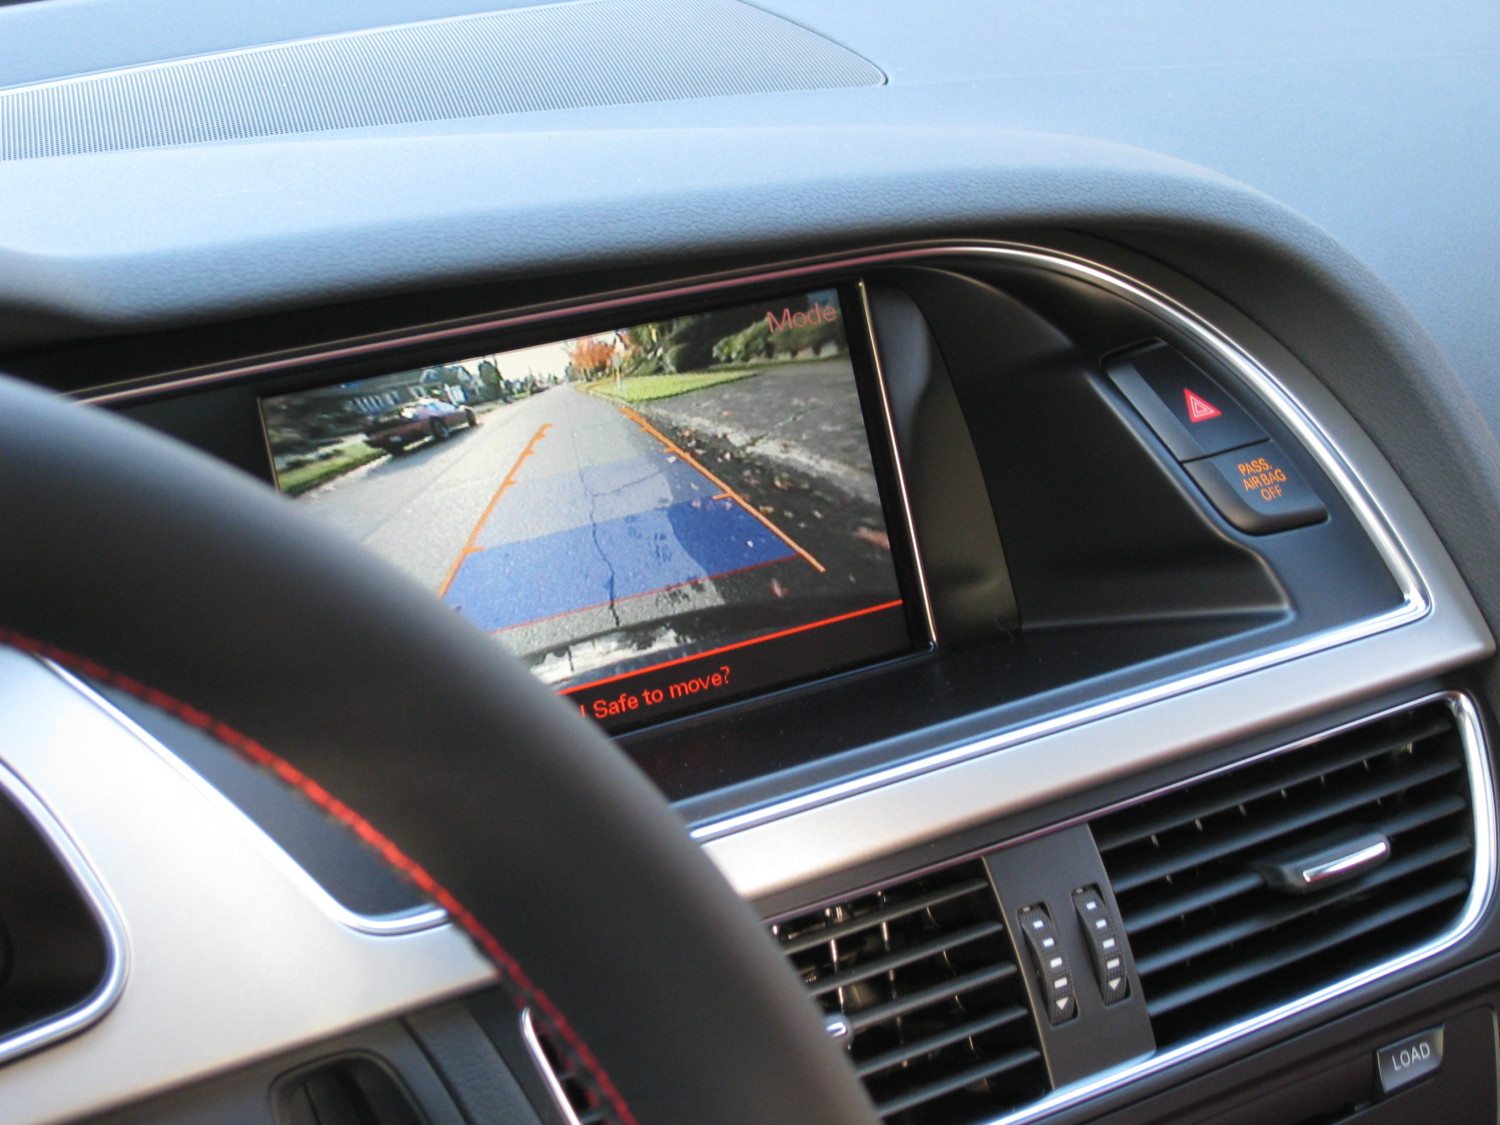 Audi S5: PDC and backup camera